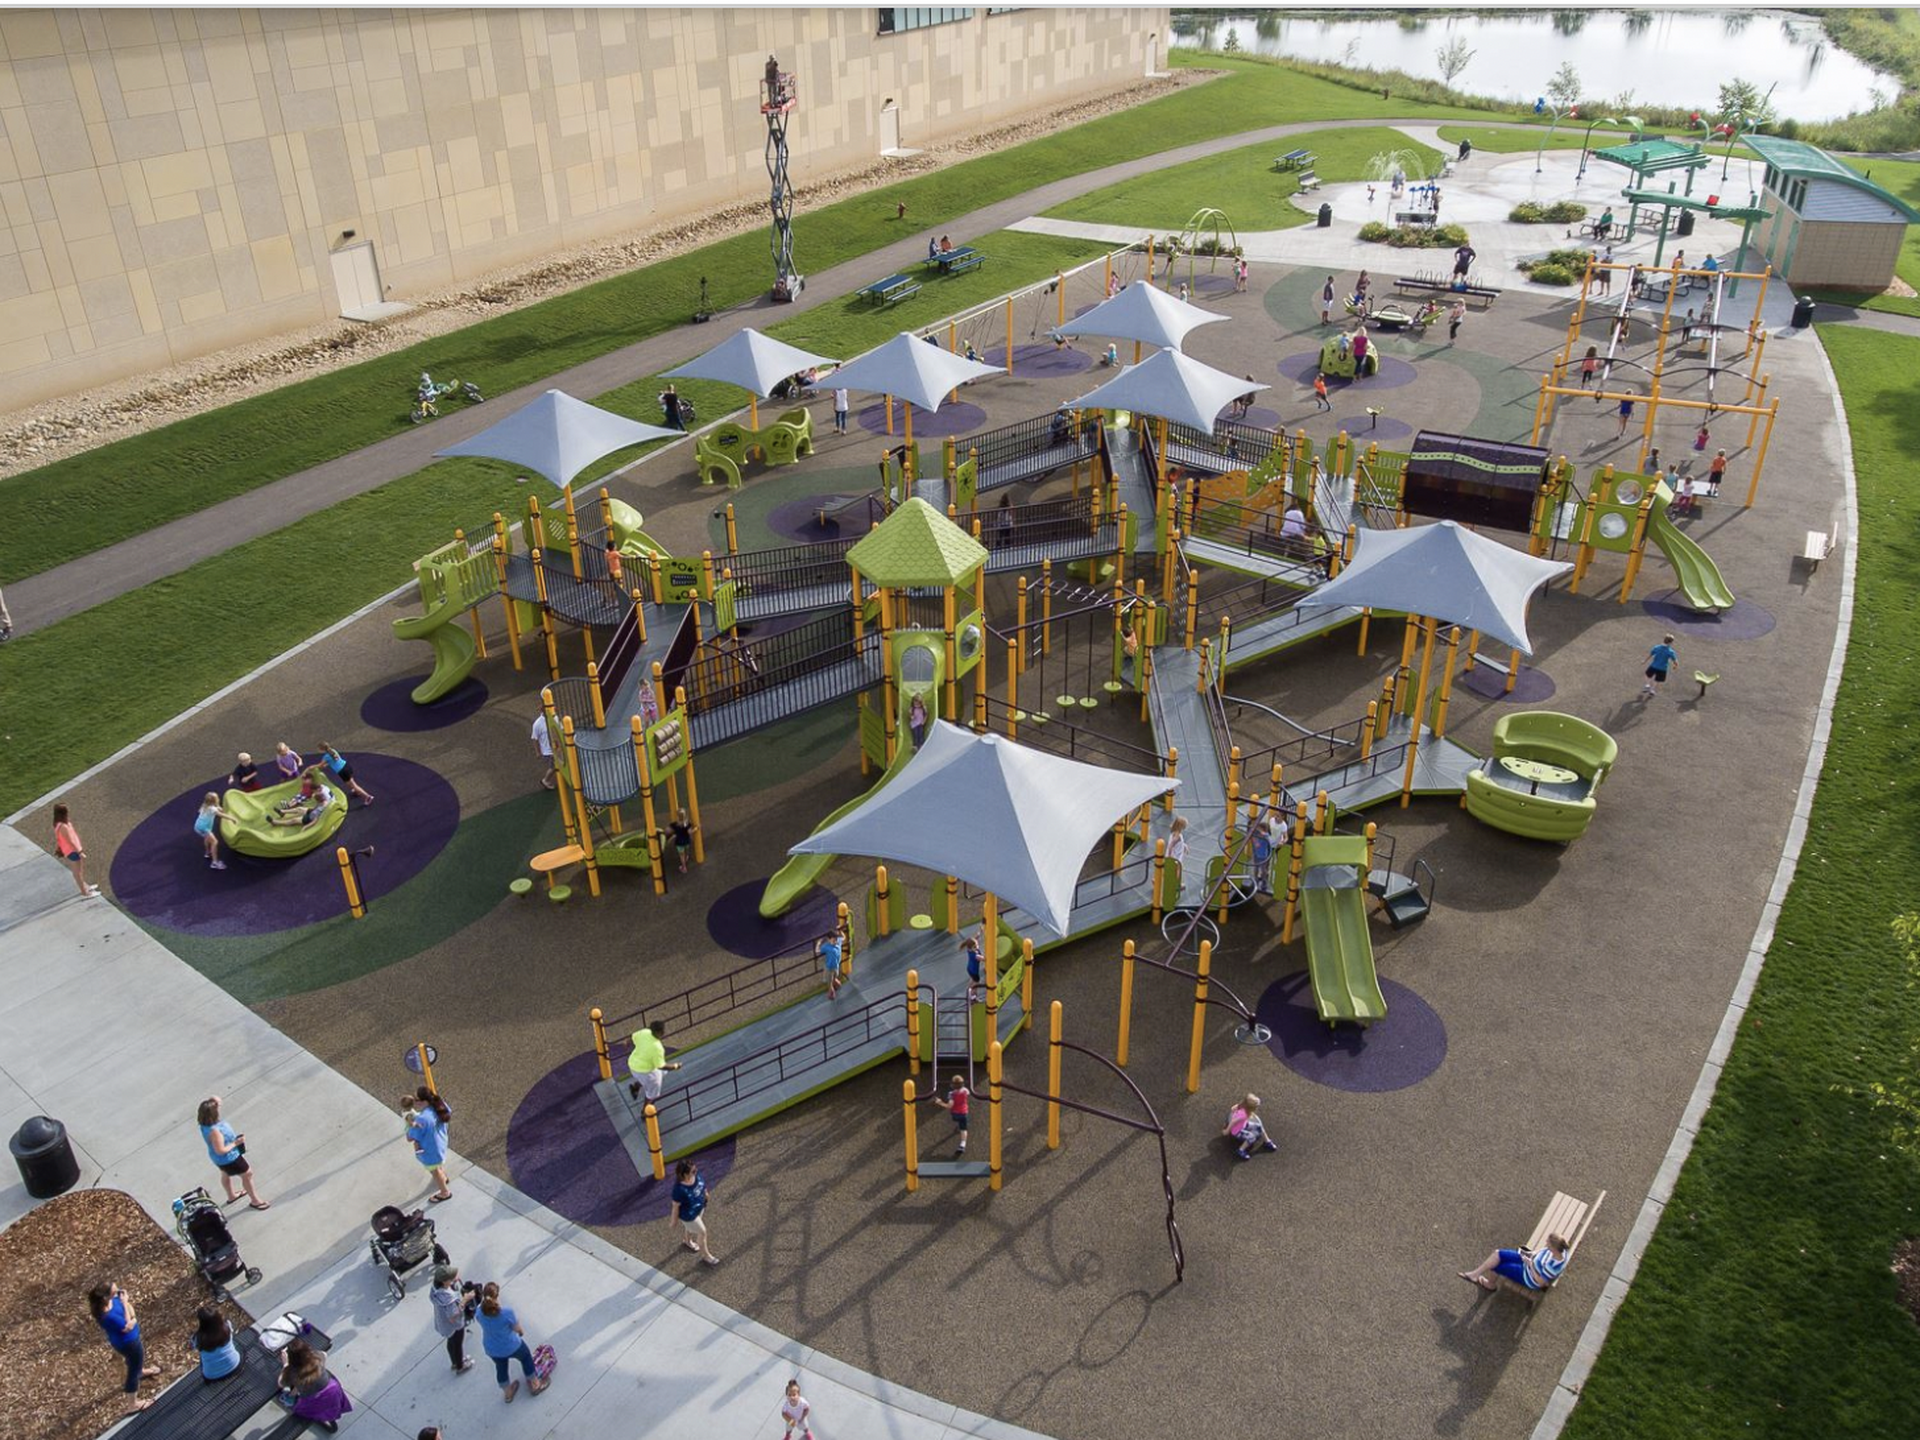 BIG List of Indoor Playgrounds in Minnesota and the Twin Cities in 2022